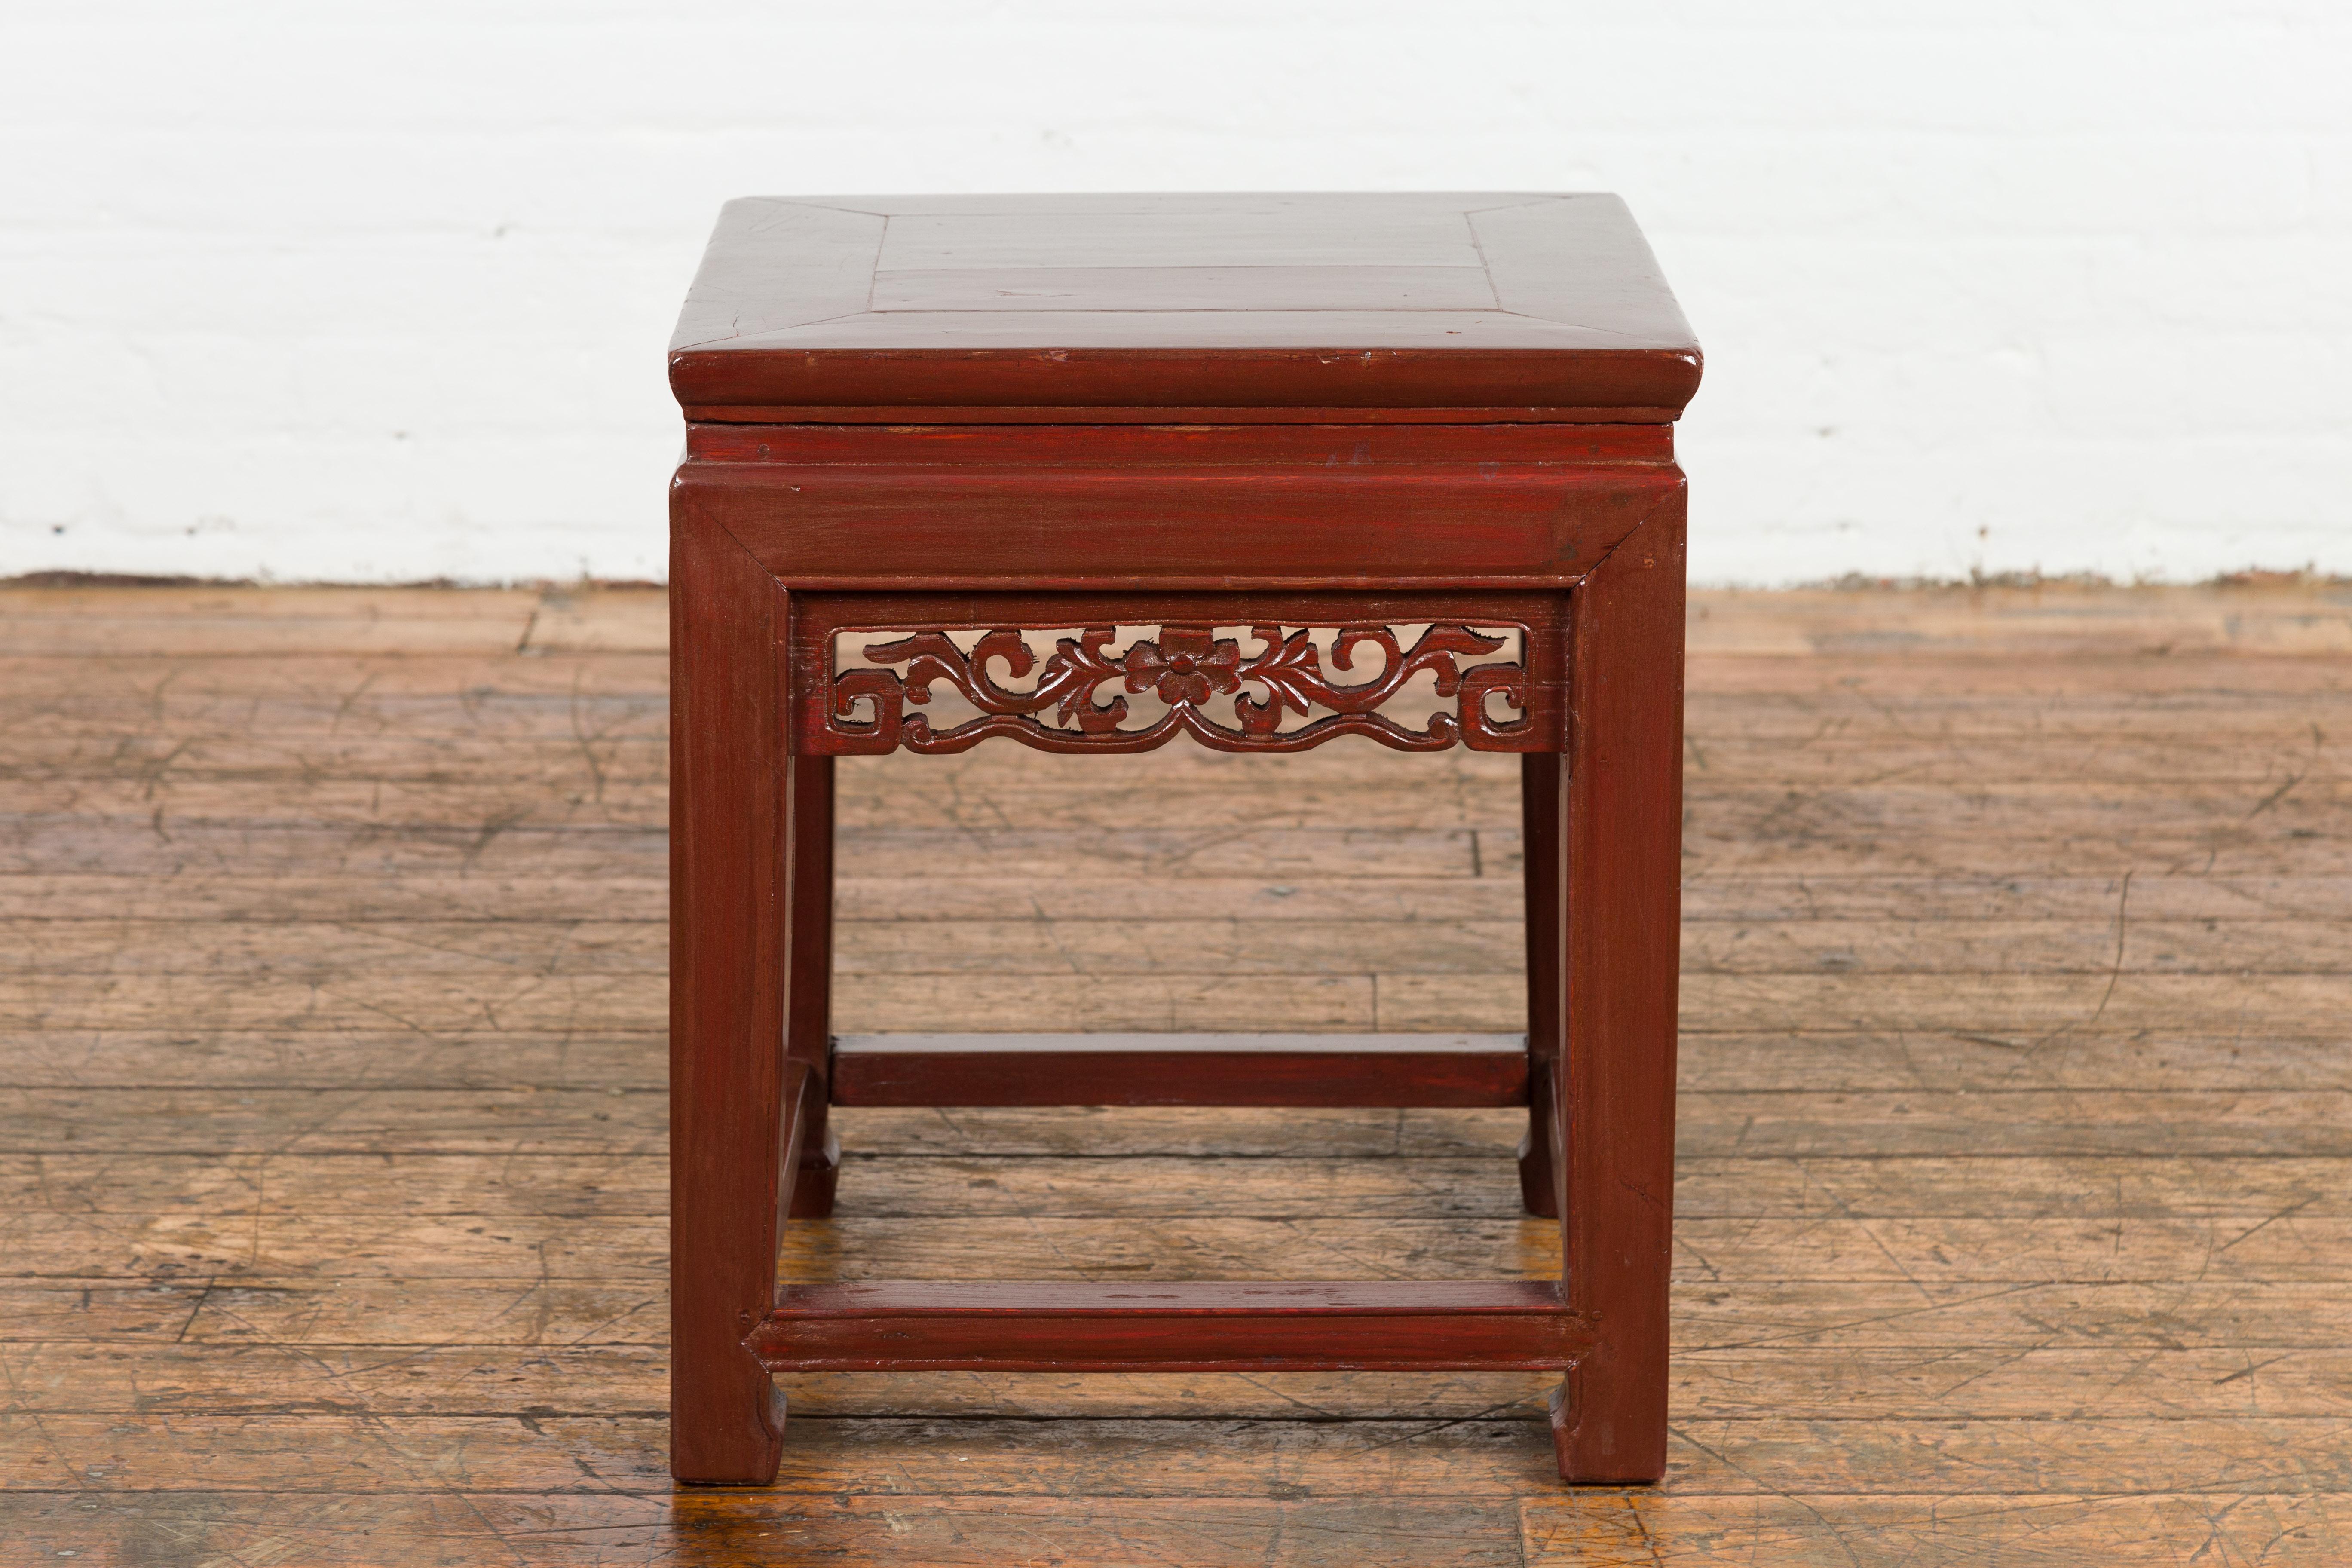 Wood Chinese Late Qing Dynasty Period Red Lacquer Carved Side Table or Stool For Sale